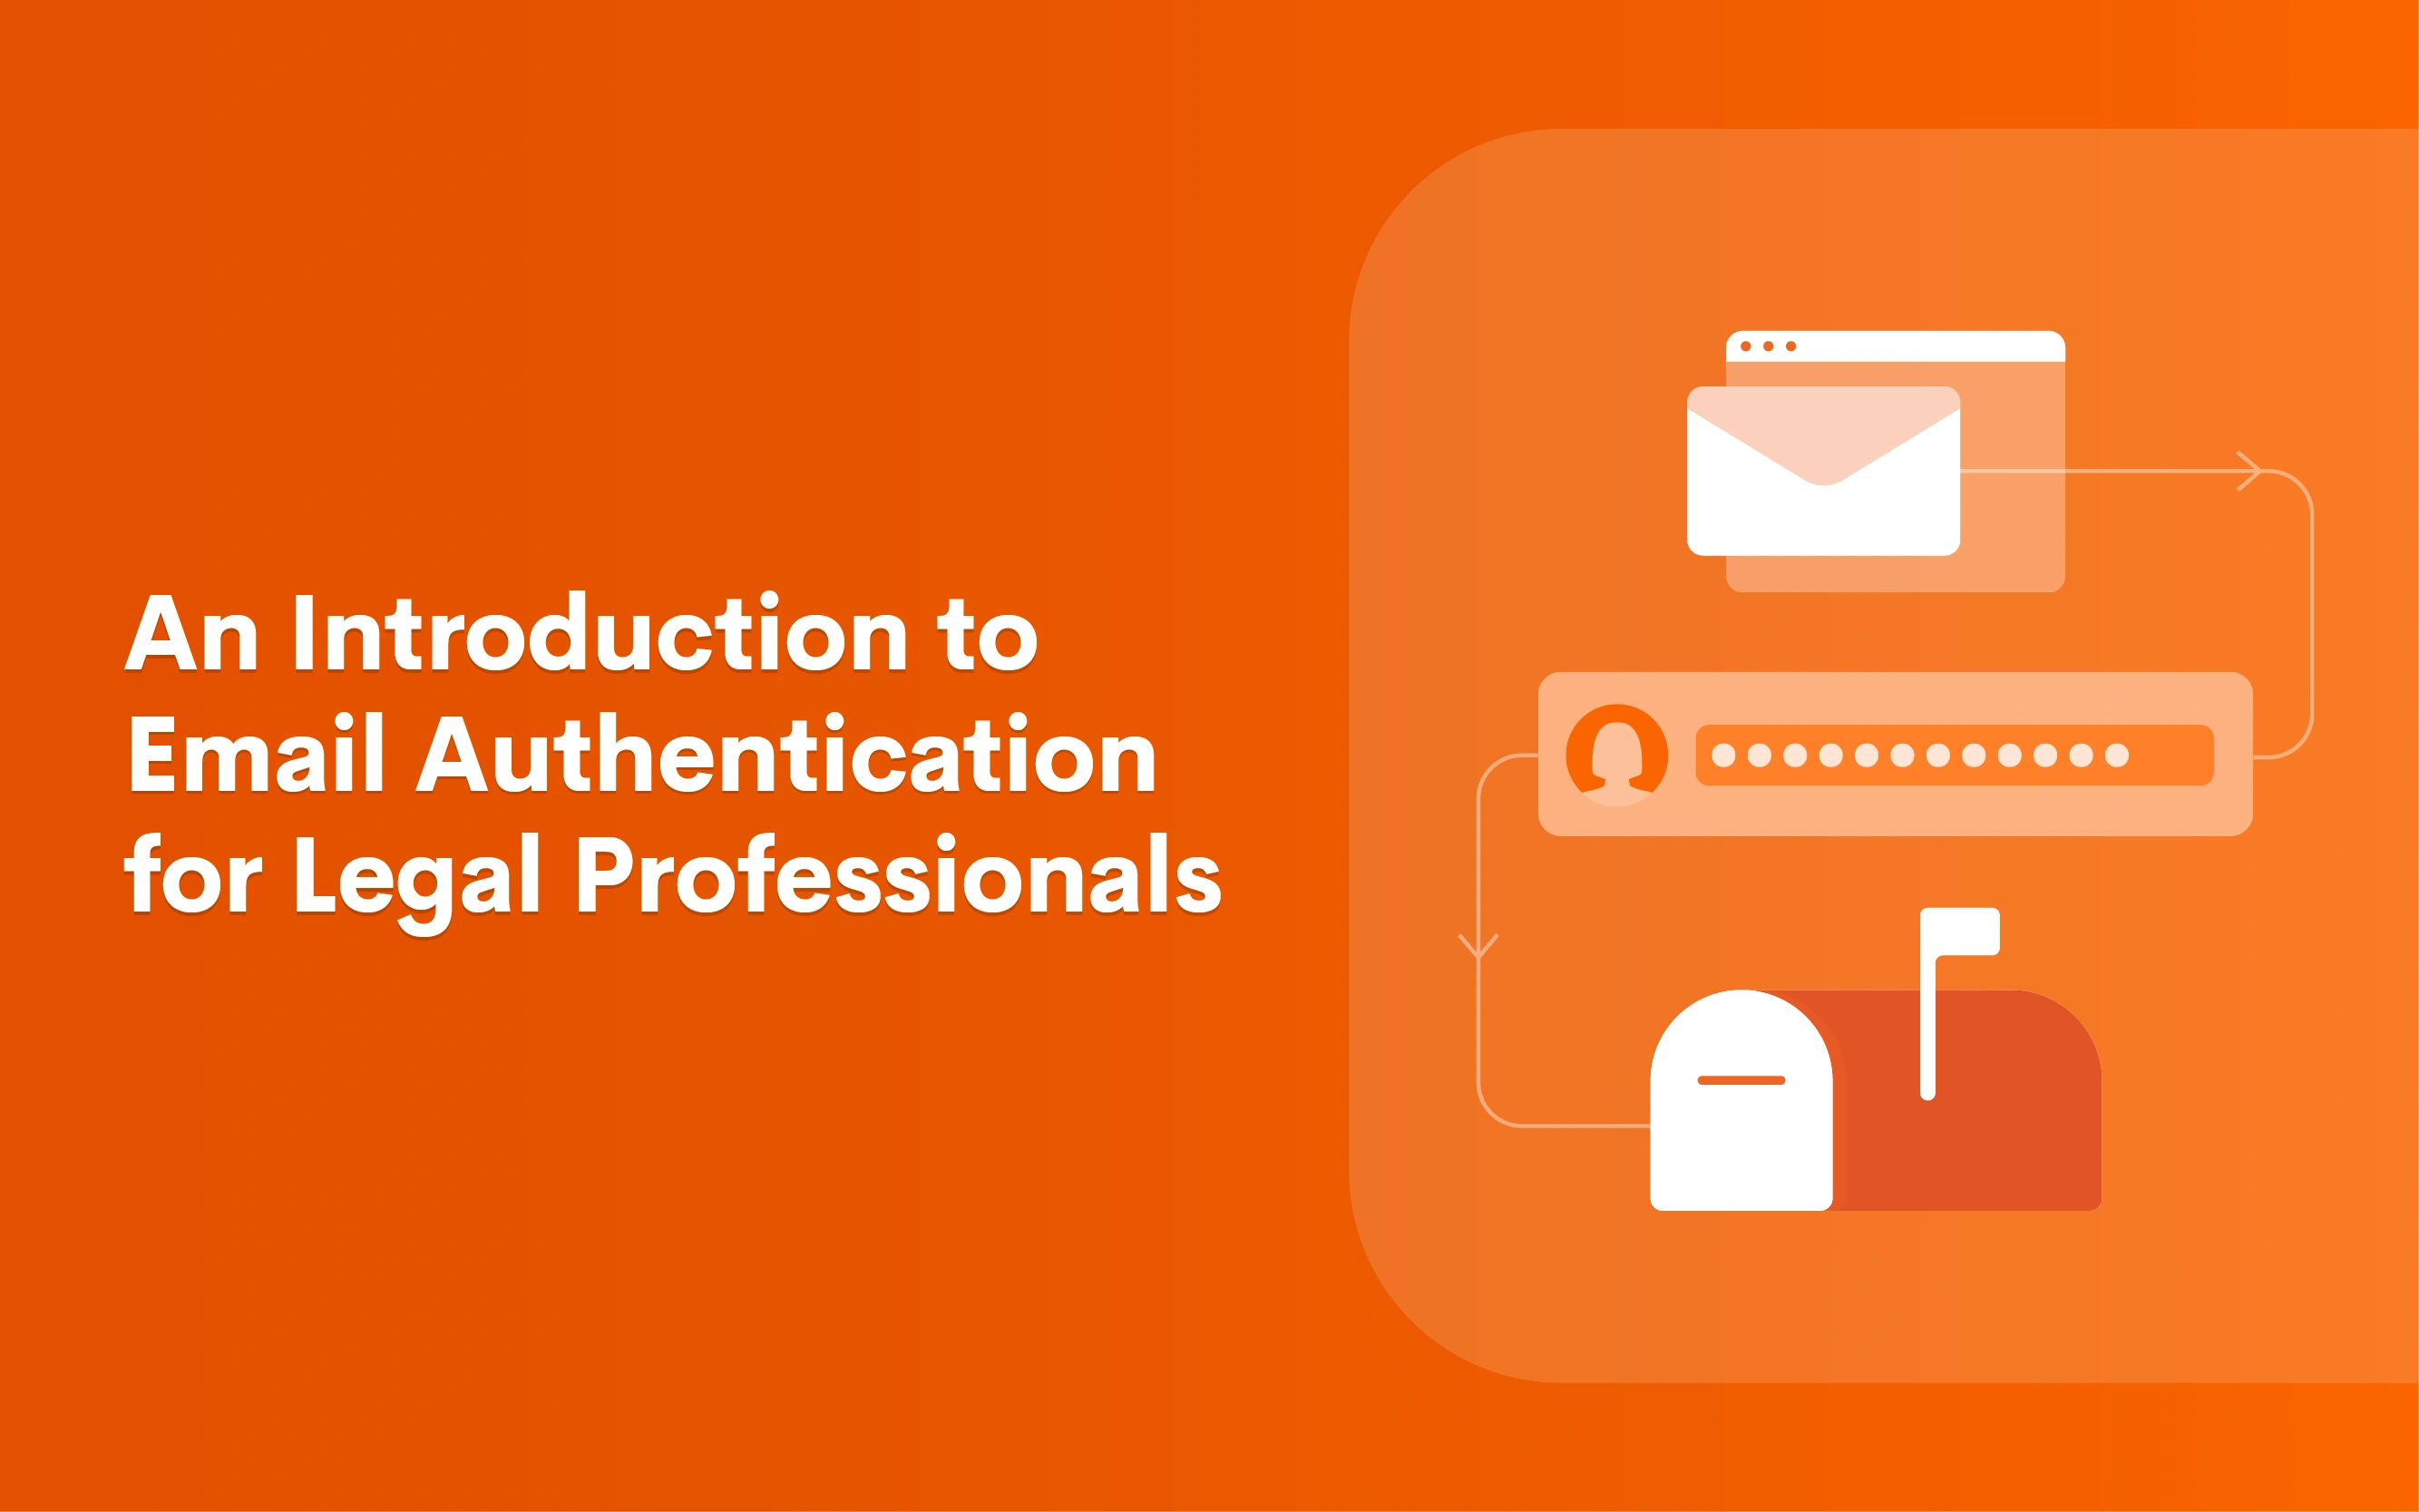 An Introduction to Email Authentication for Legal Professionals